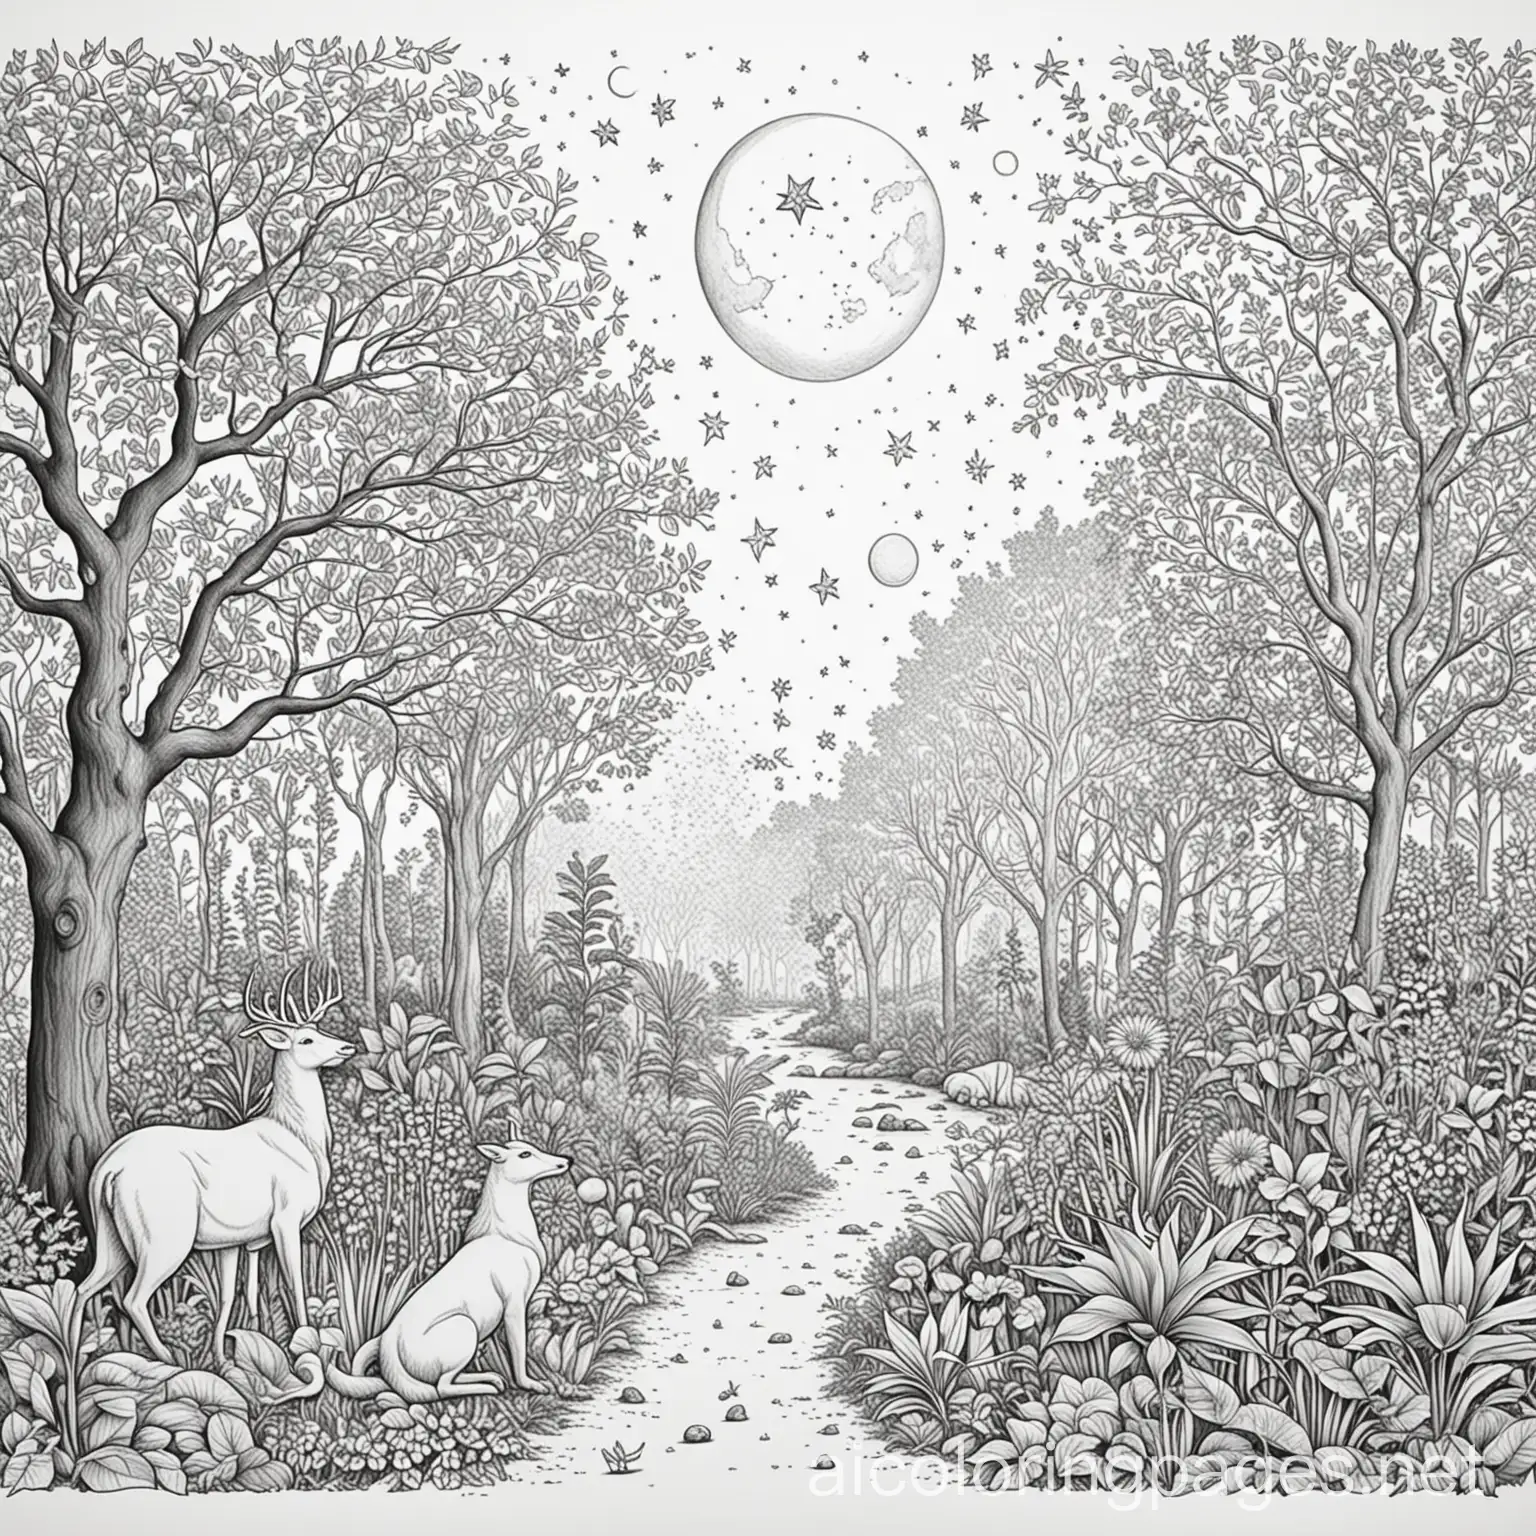 Illustration of the Earth, sun, moon, stars, animals, plants, and Adam and Eve in the Garden of Eden., Coloring Page, black and white, line art, white background, Simplicity, Ample White Space. The background of the coloring page is plain white to make it easy for young children to color within the lines. The outlines of all the subjects are easy to distinguish, making it simple for kids to color without too much difficulty